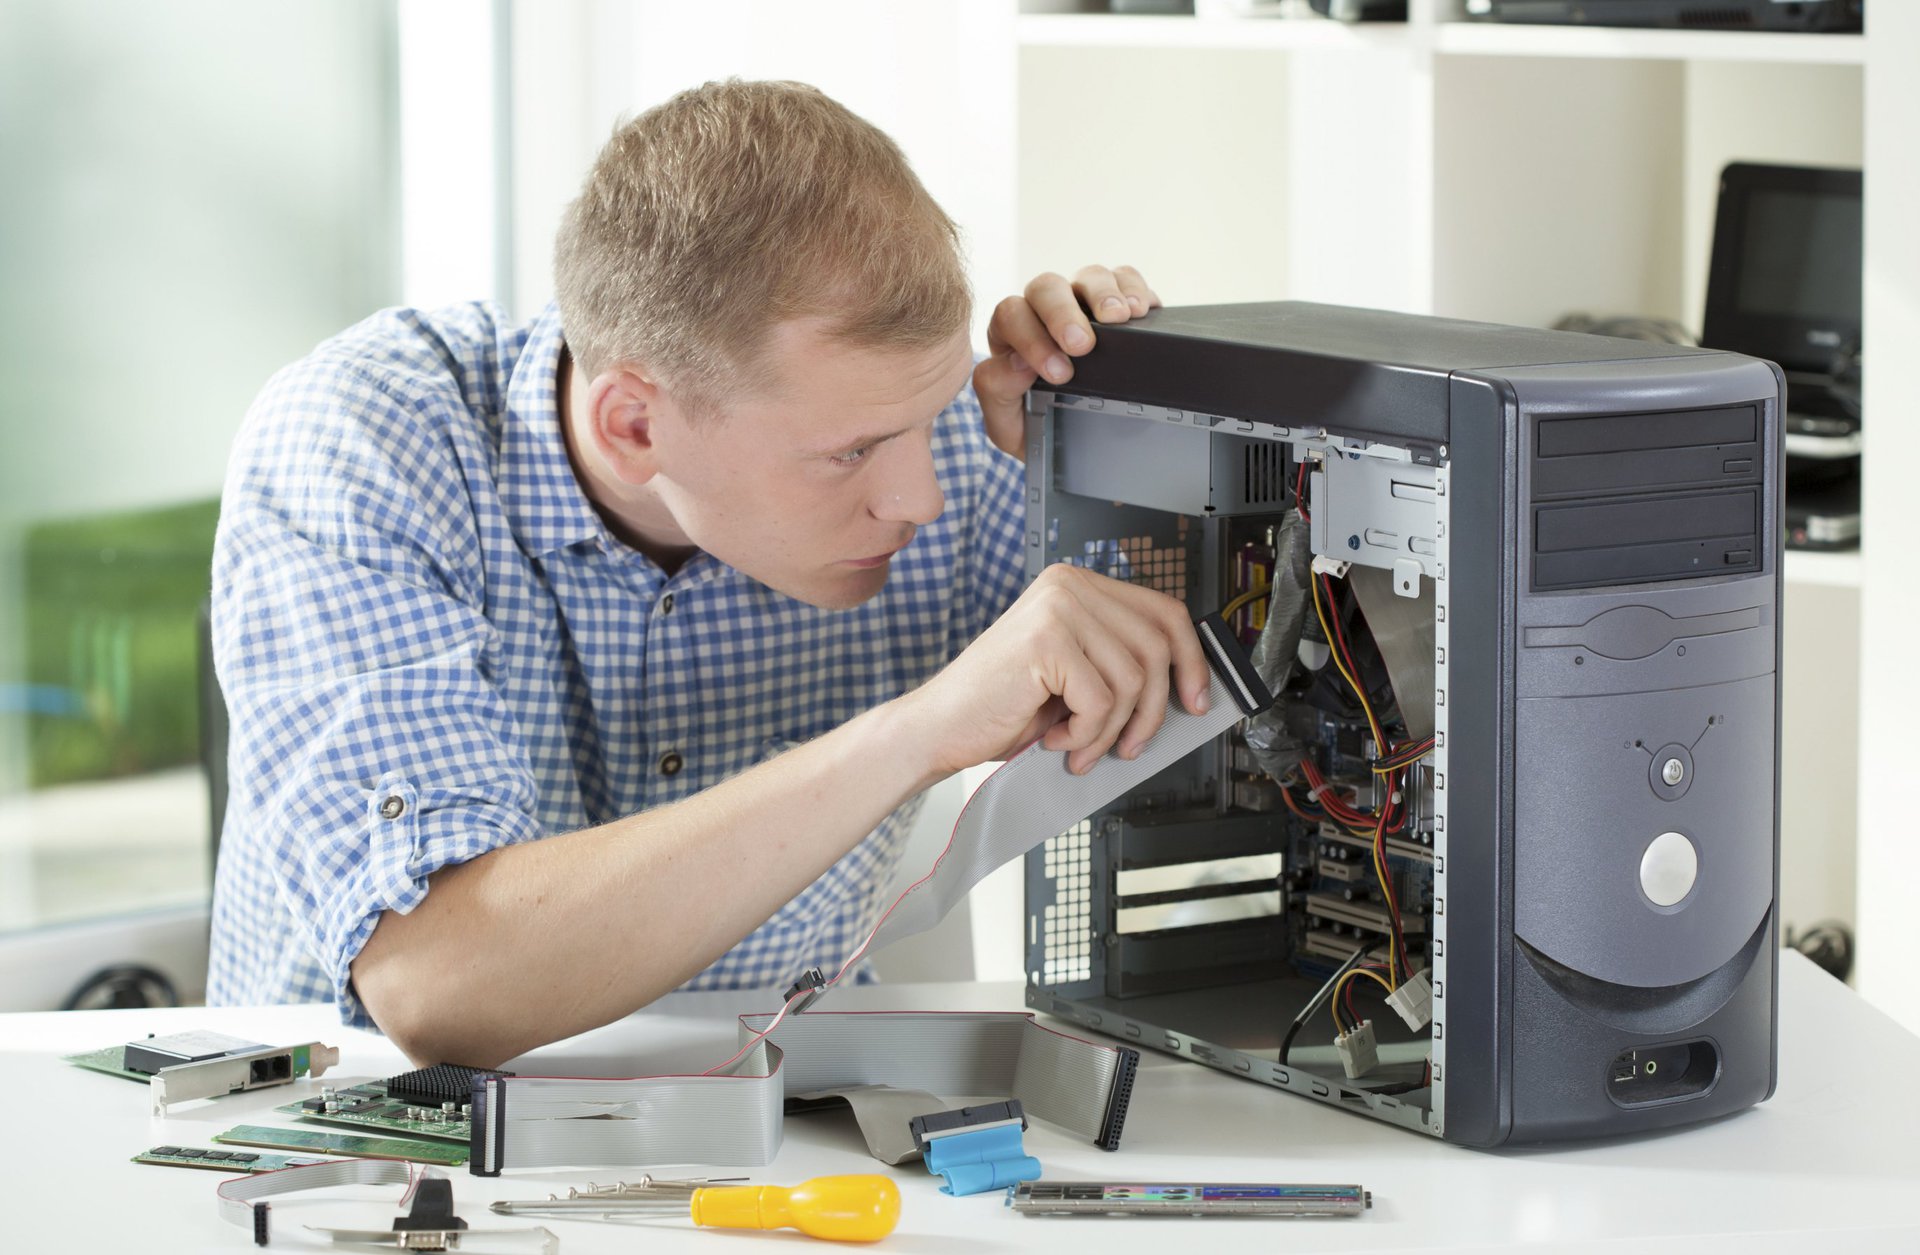 Layton FL Onsite PC & Printer Repair, Networking, Voice & Data Cabling Services